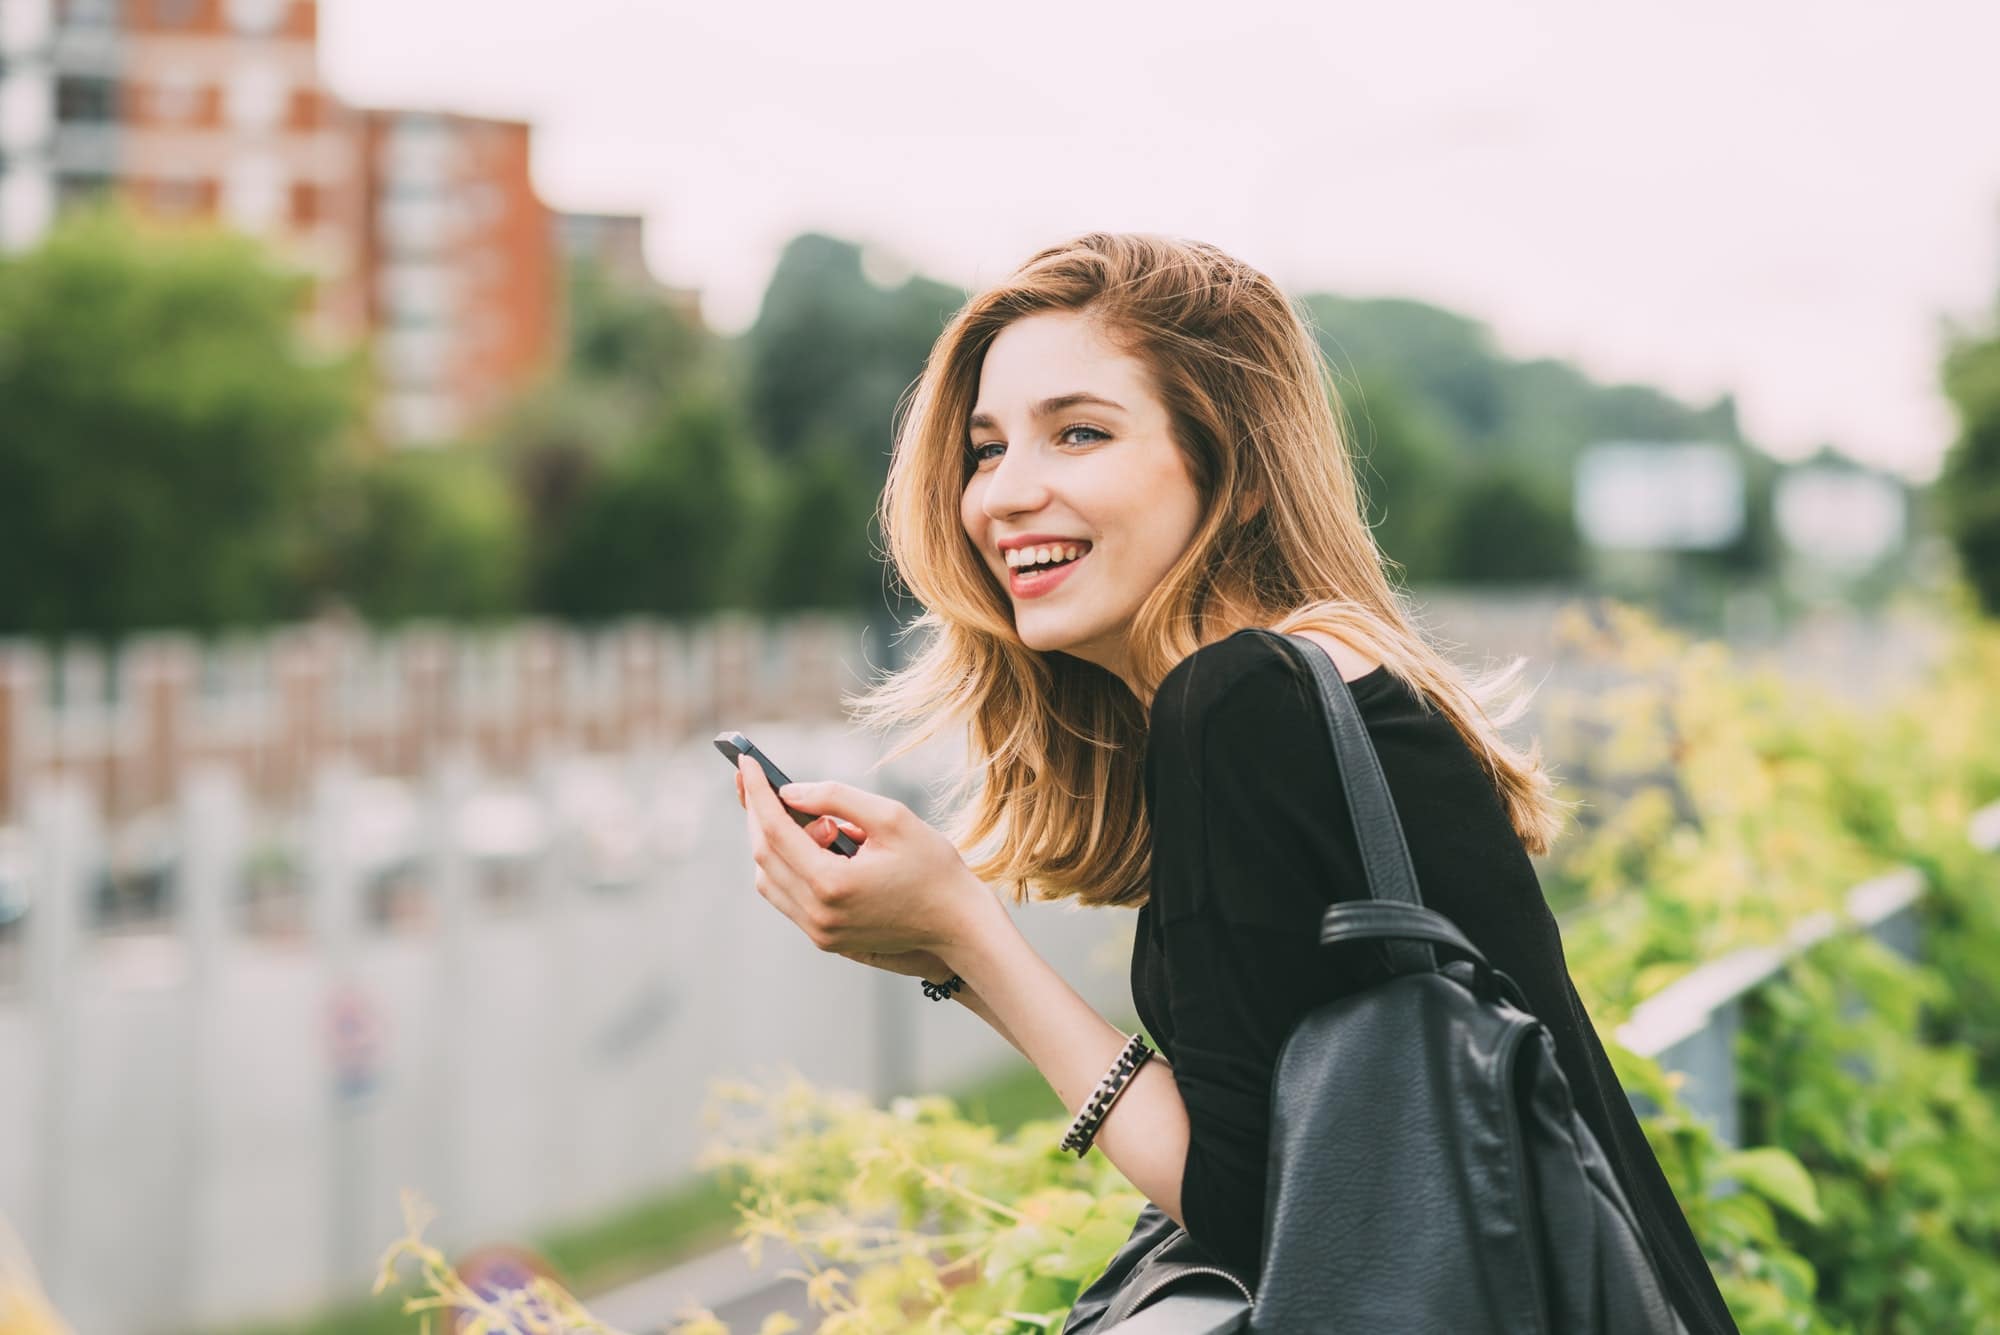 Young woman using smartphone laughing